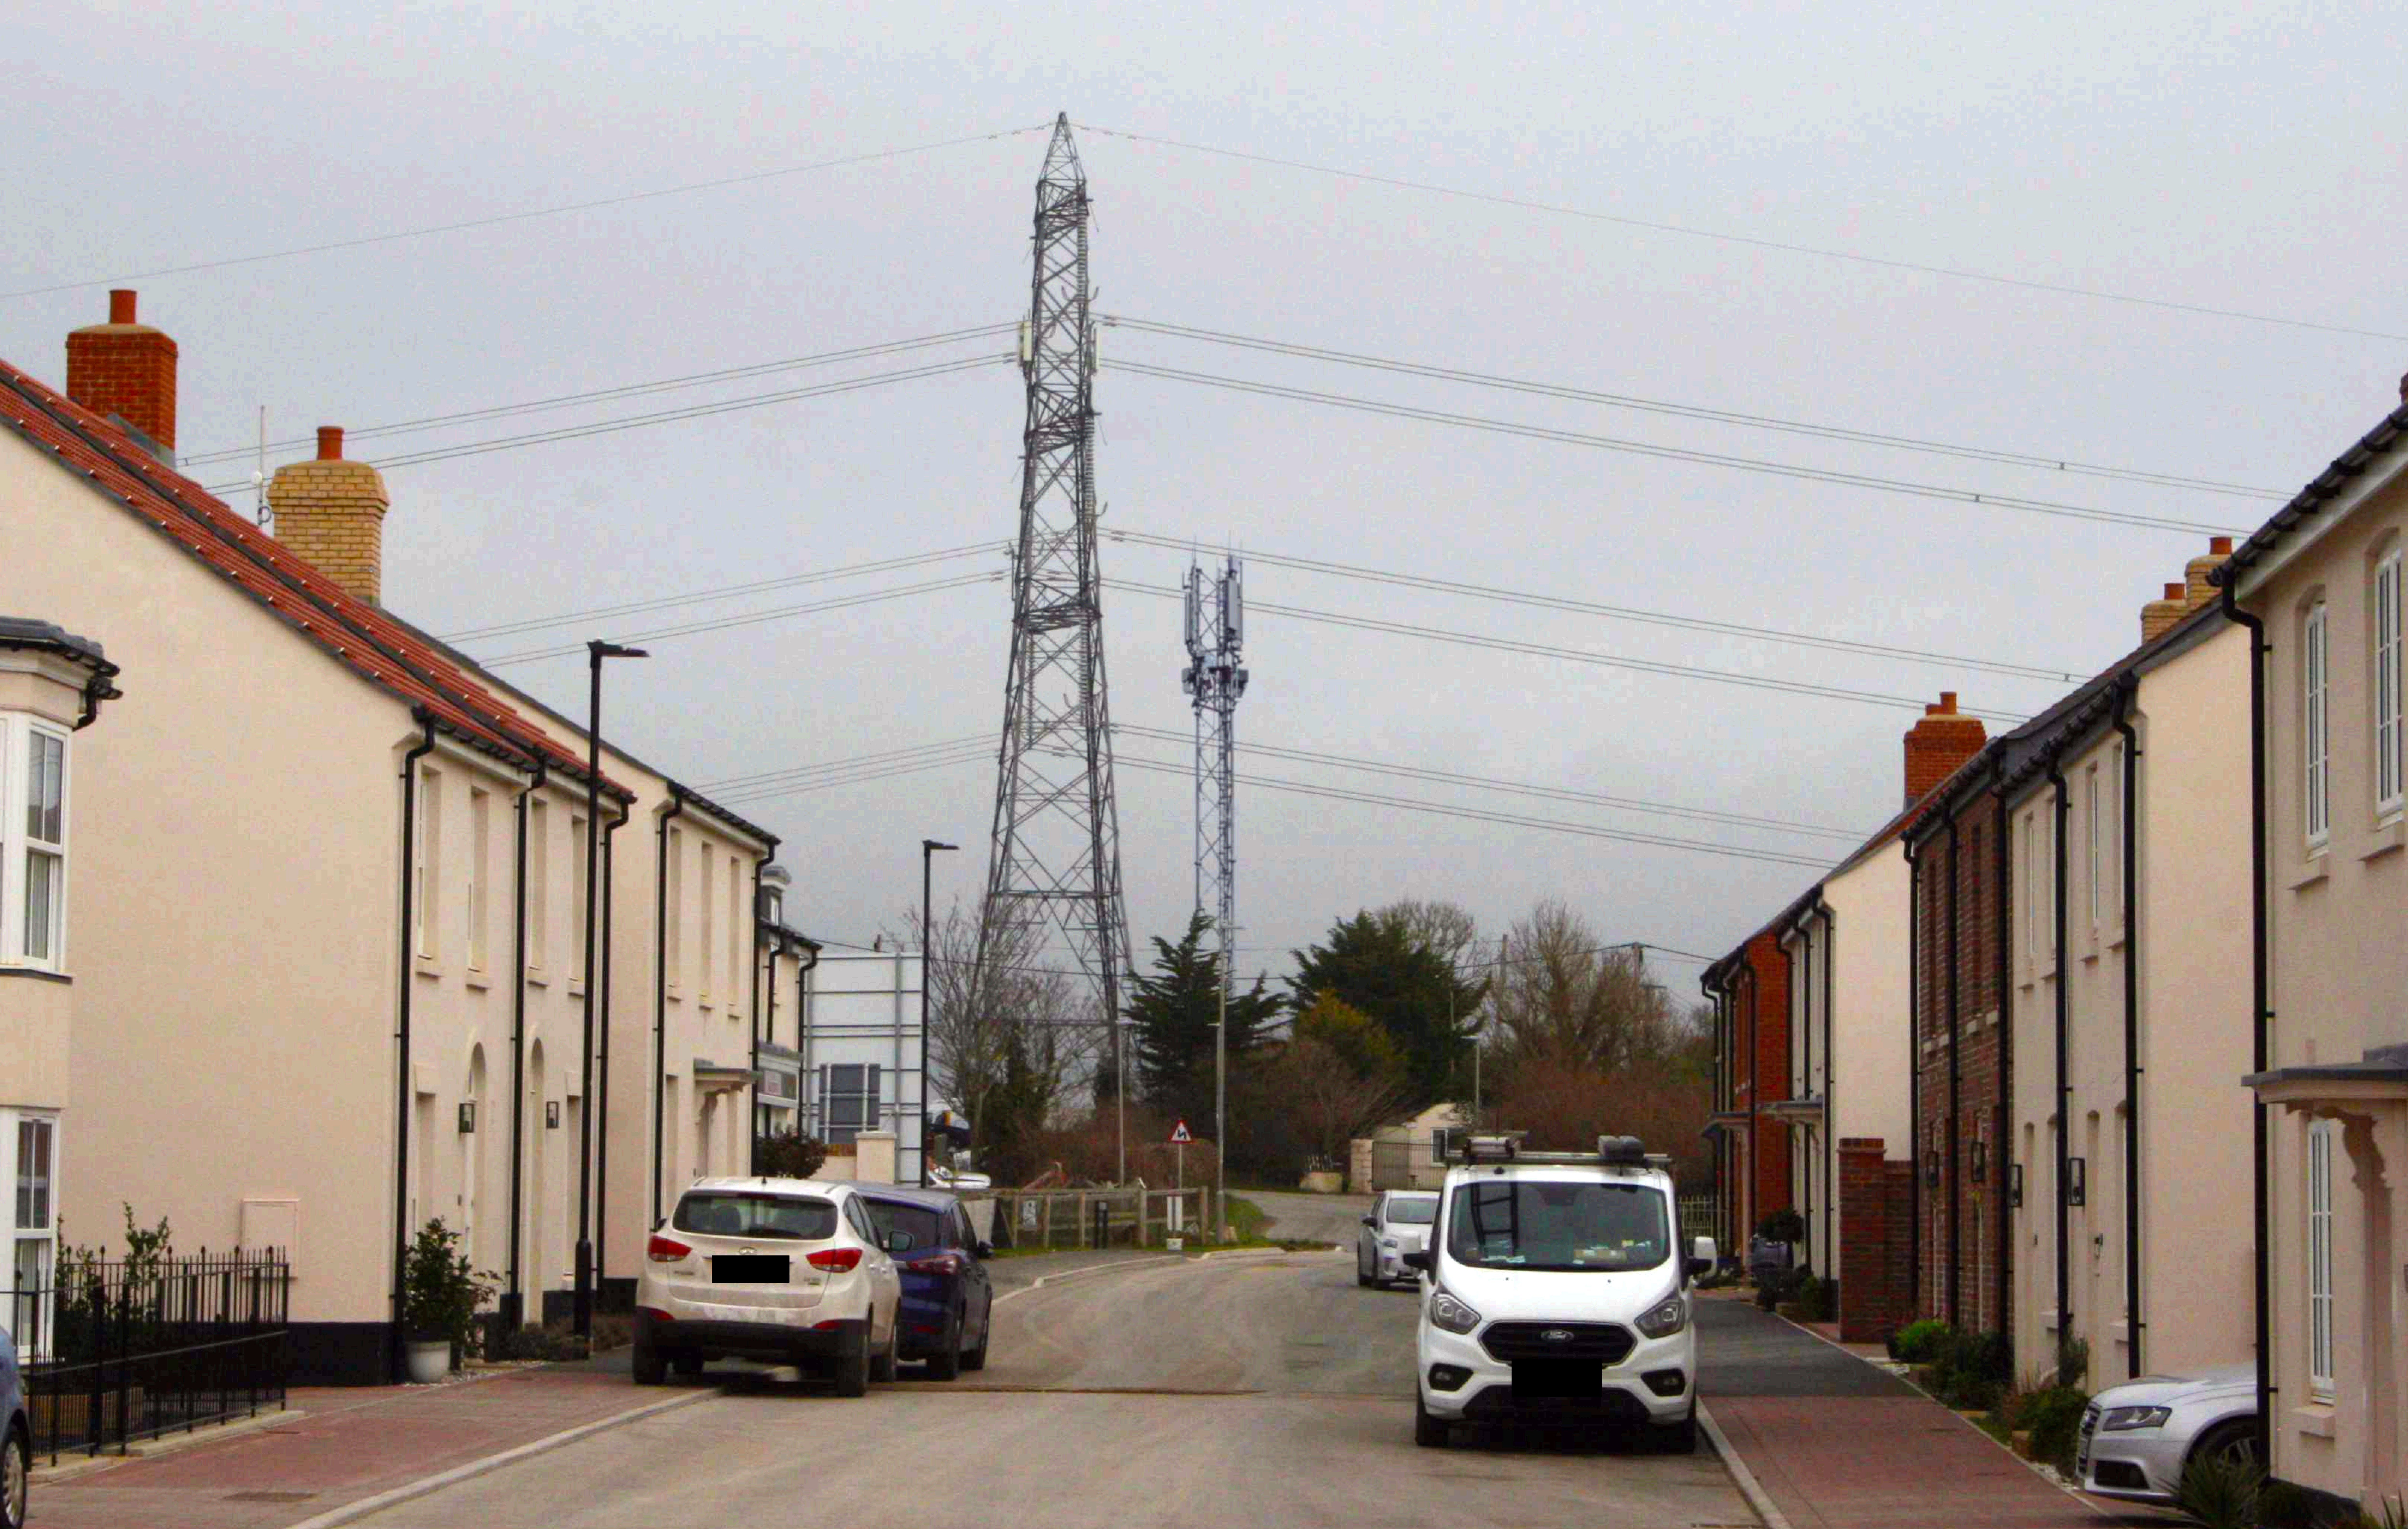 How the mast would look from Chickerell Village. Picture: ATG/Dorset Council